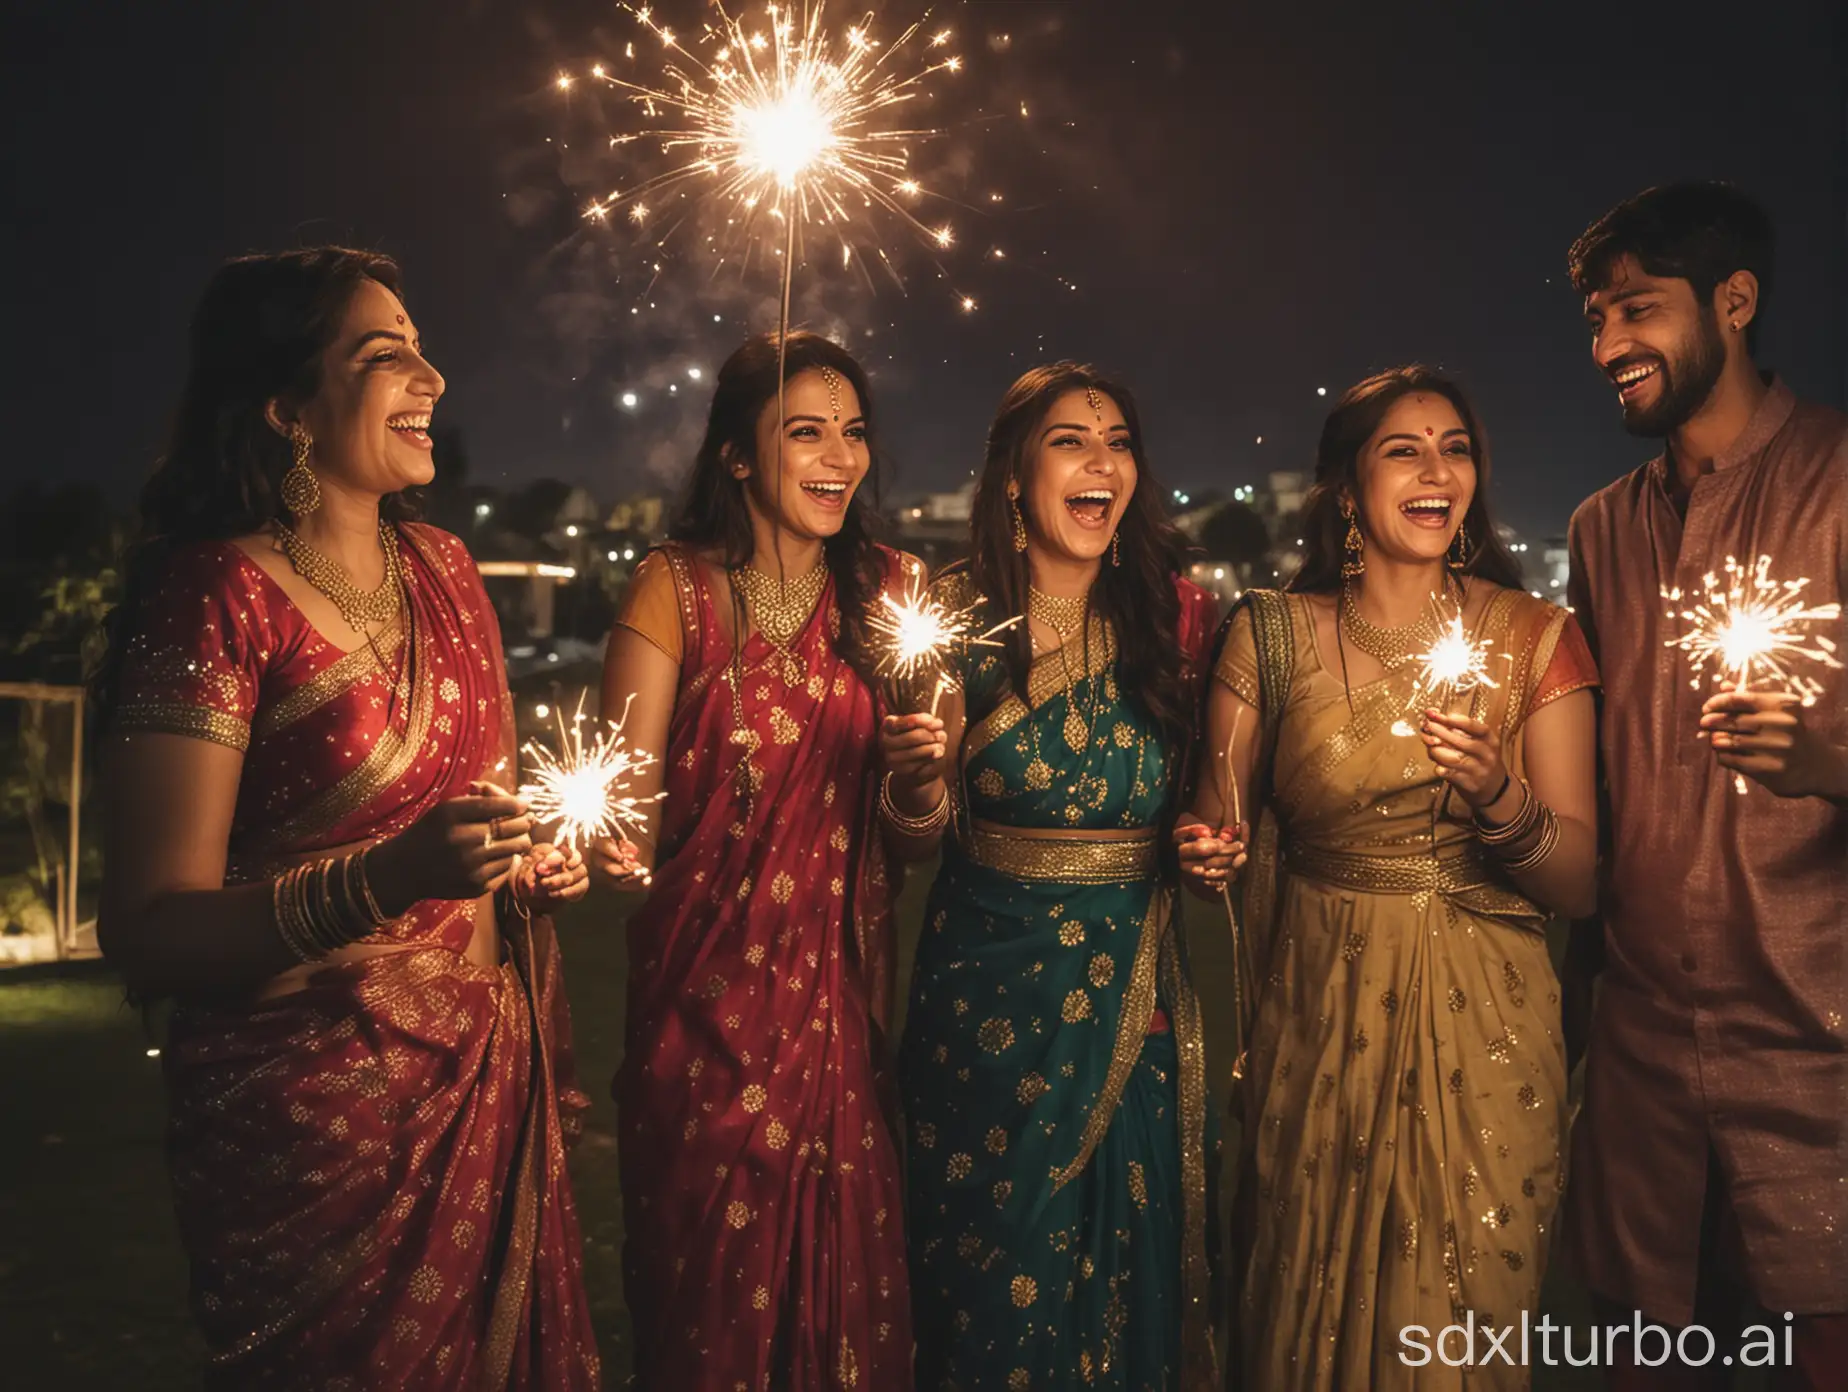 A group of friends dressed in traditional Indian attire, holding sparklers and laughing during Diwali celebrations at night.